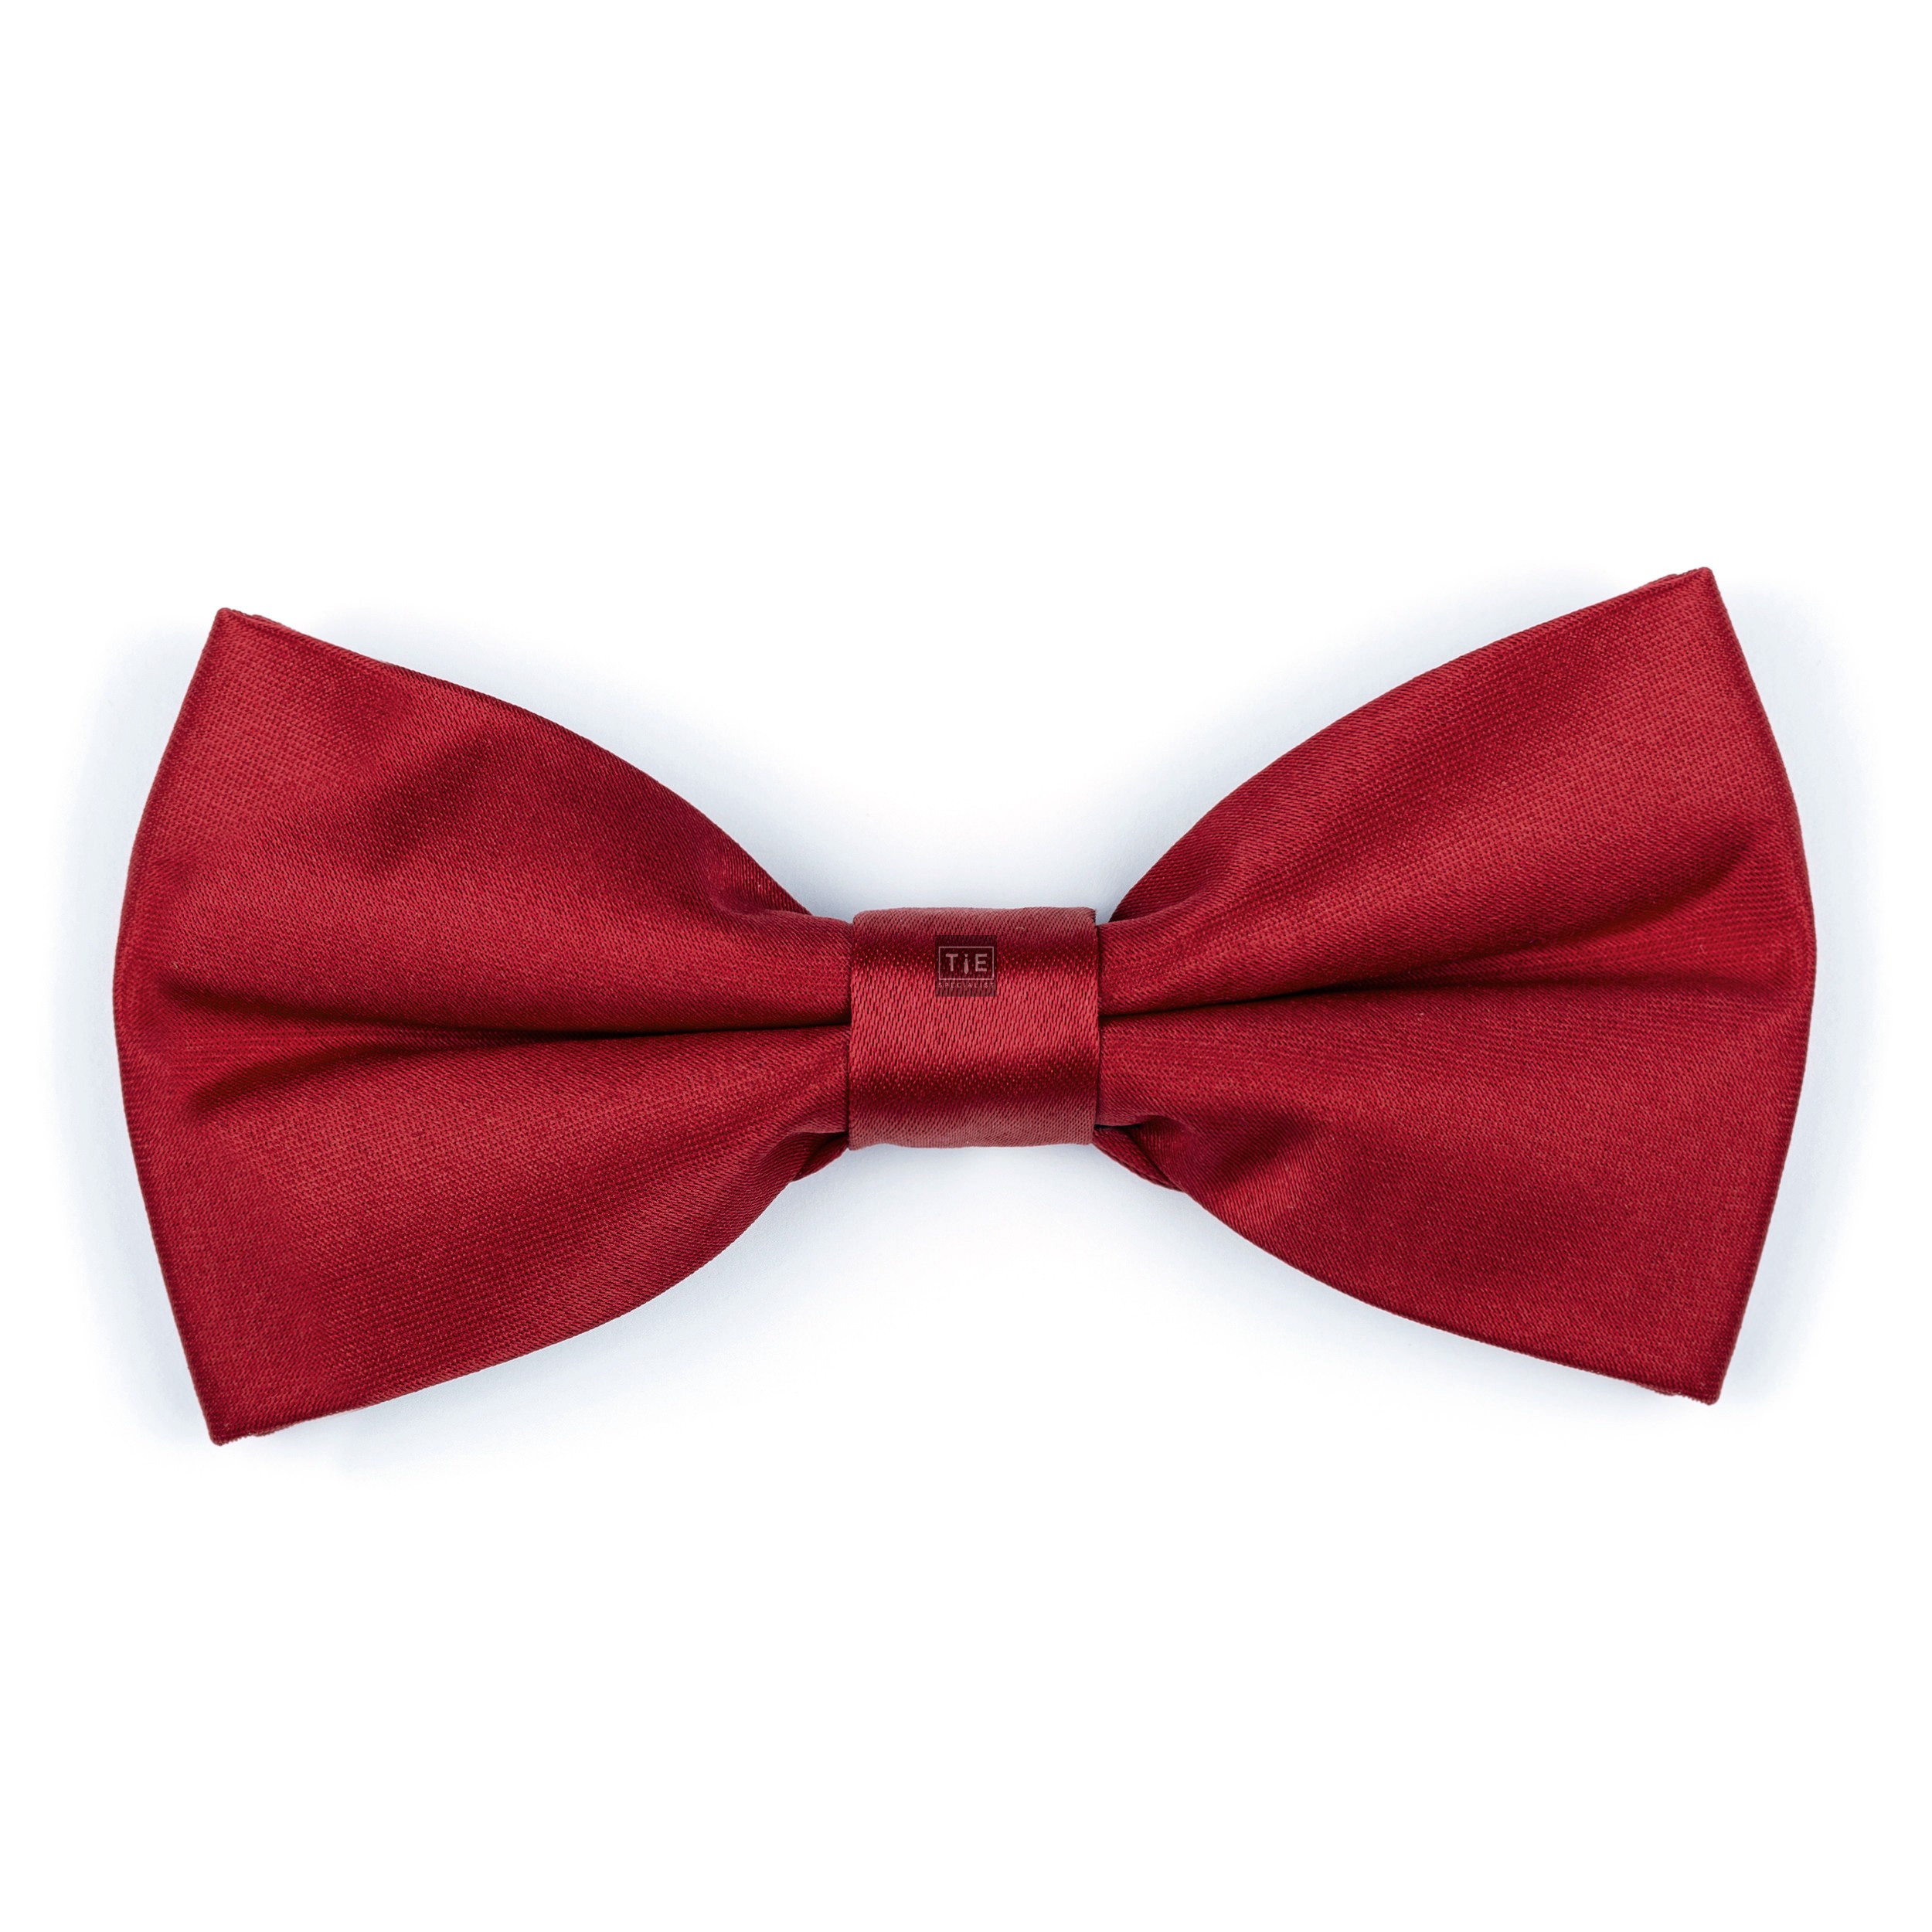 Jalapeno Red Bow Tie - Plain Red Pre-Tied Wedding Bow Tie